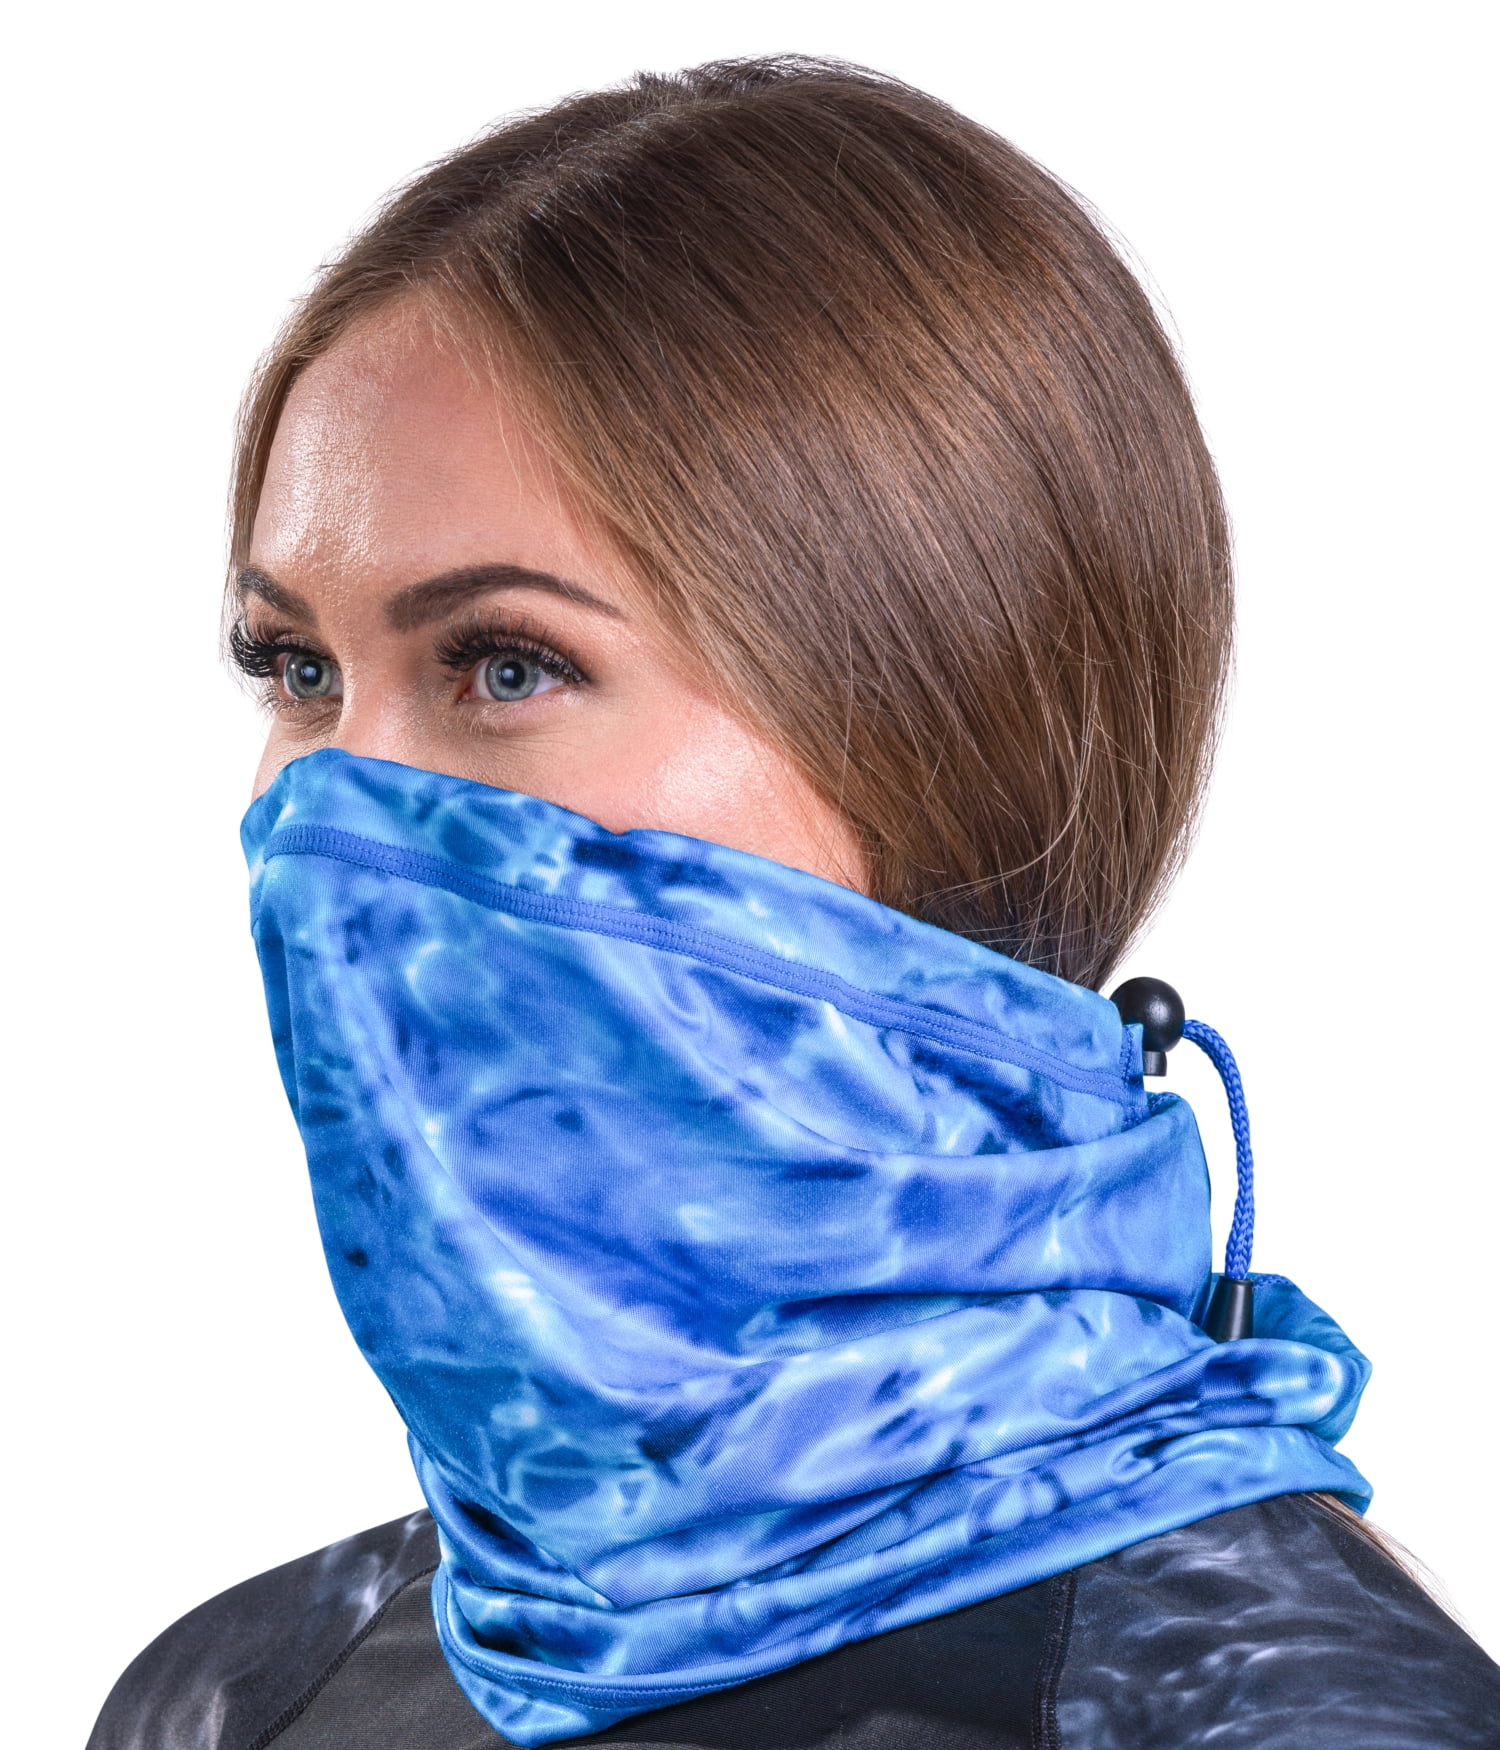 Splashing Peony Peace Sign Butterfly Peace Bandanas Face Scarf For Dust Outdoors Sports Neck Gaiter With Activated Carbon Filters